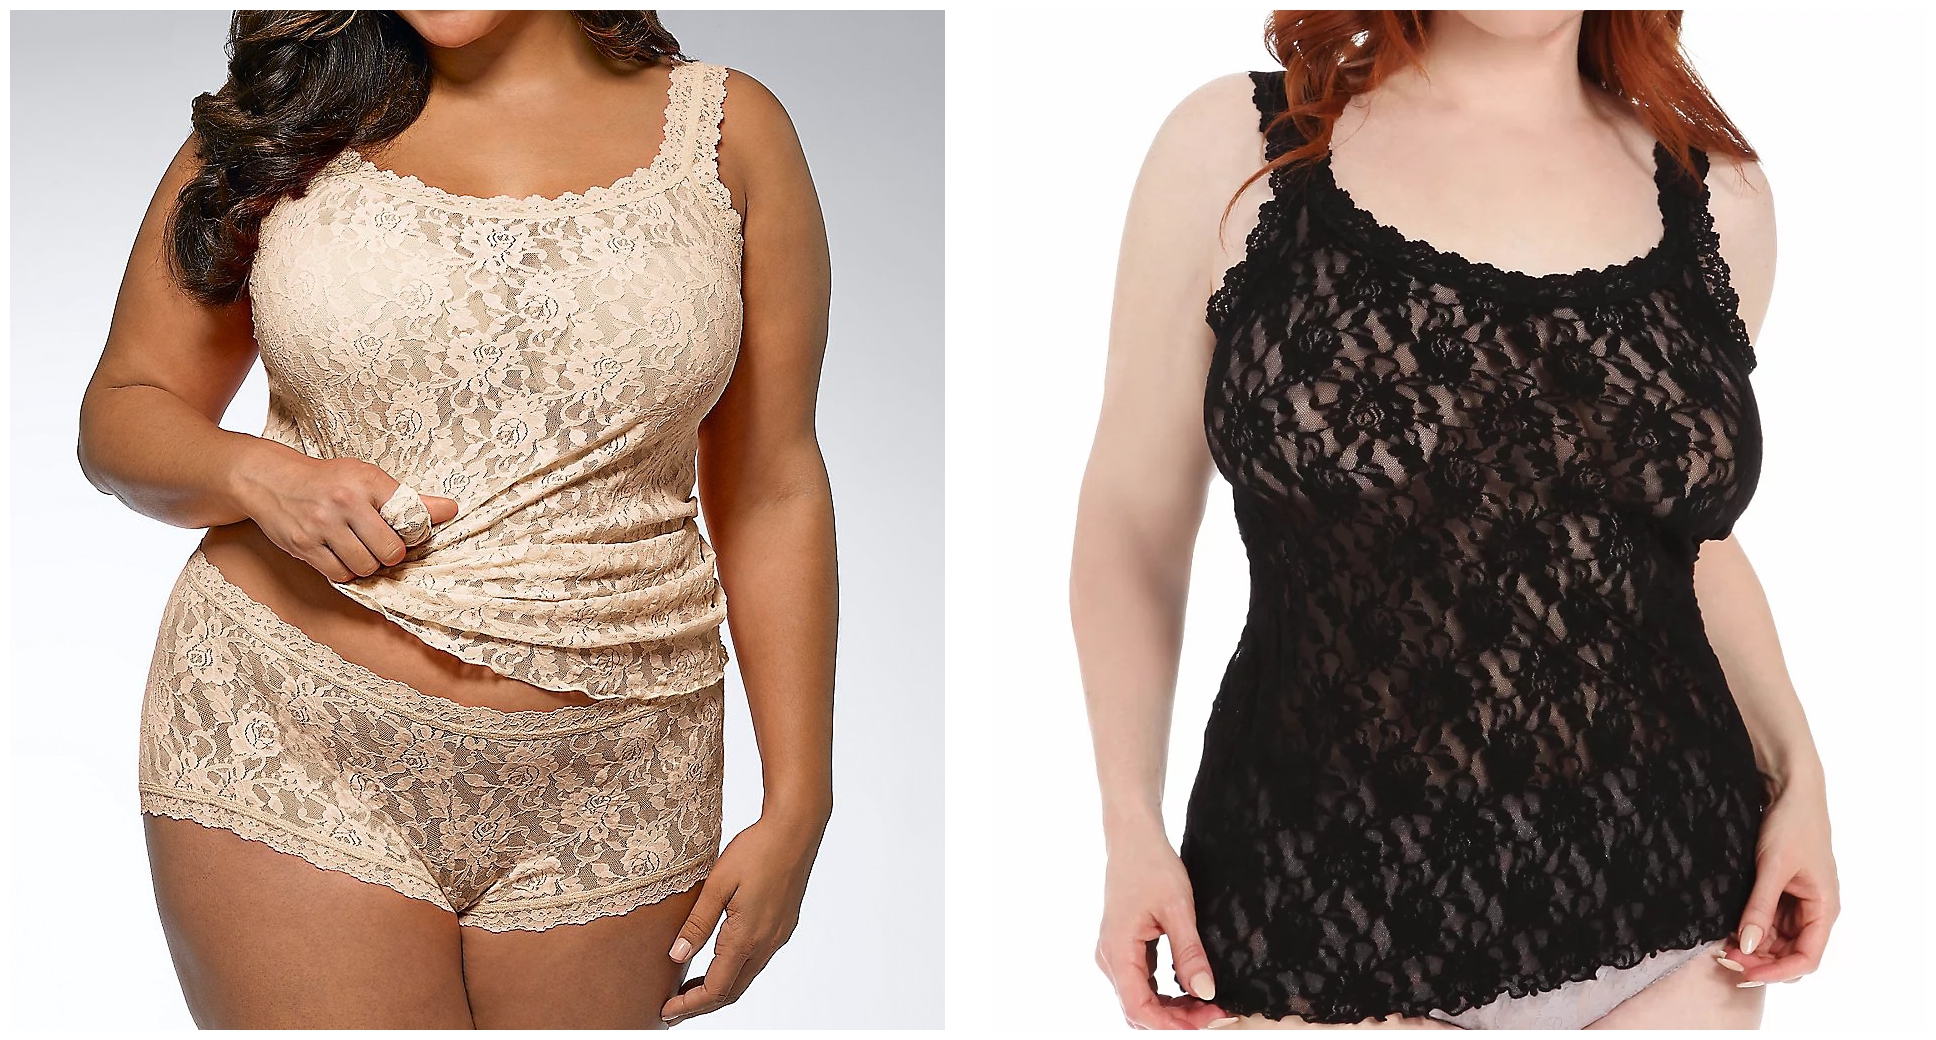 Lingerie plus size in head-turning lace is hard to resist.